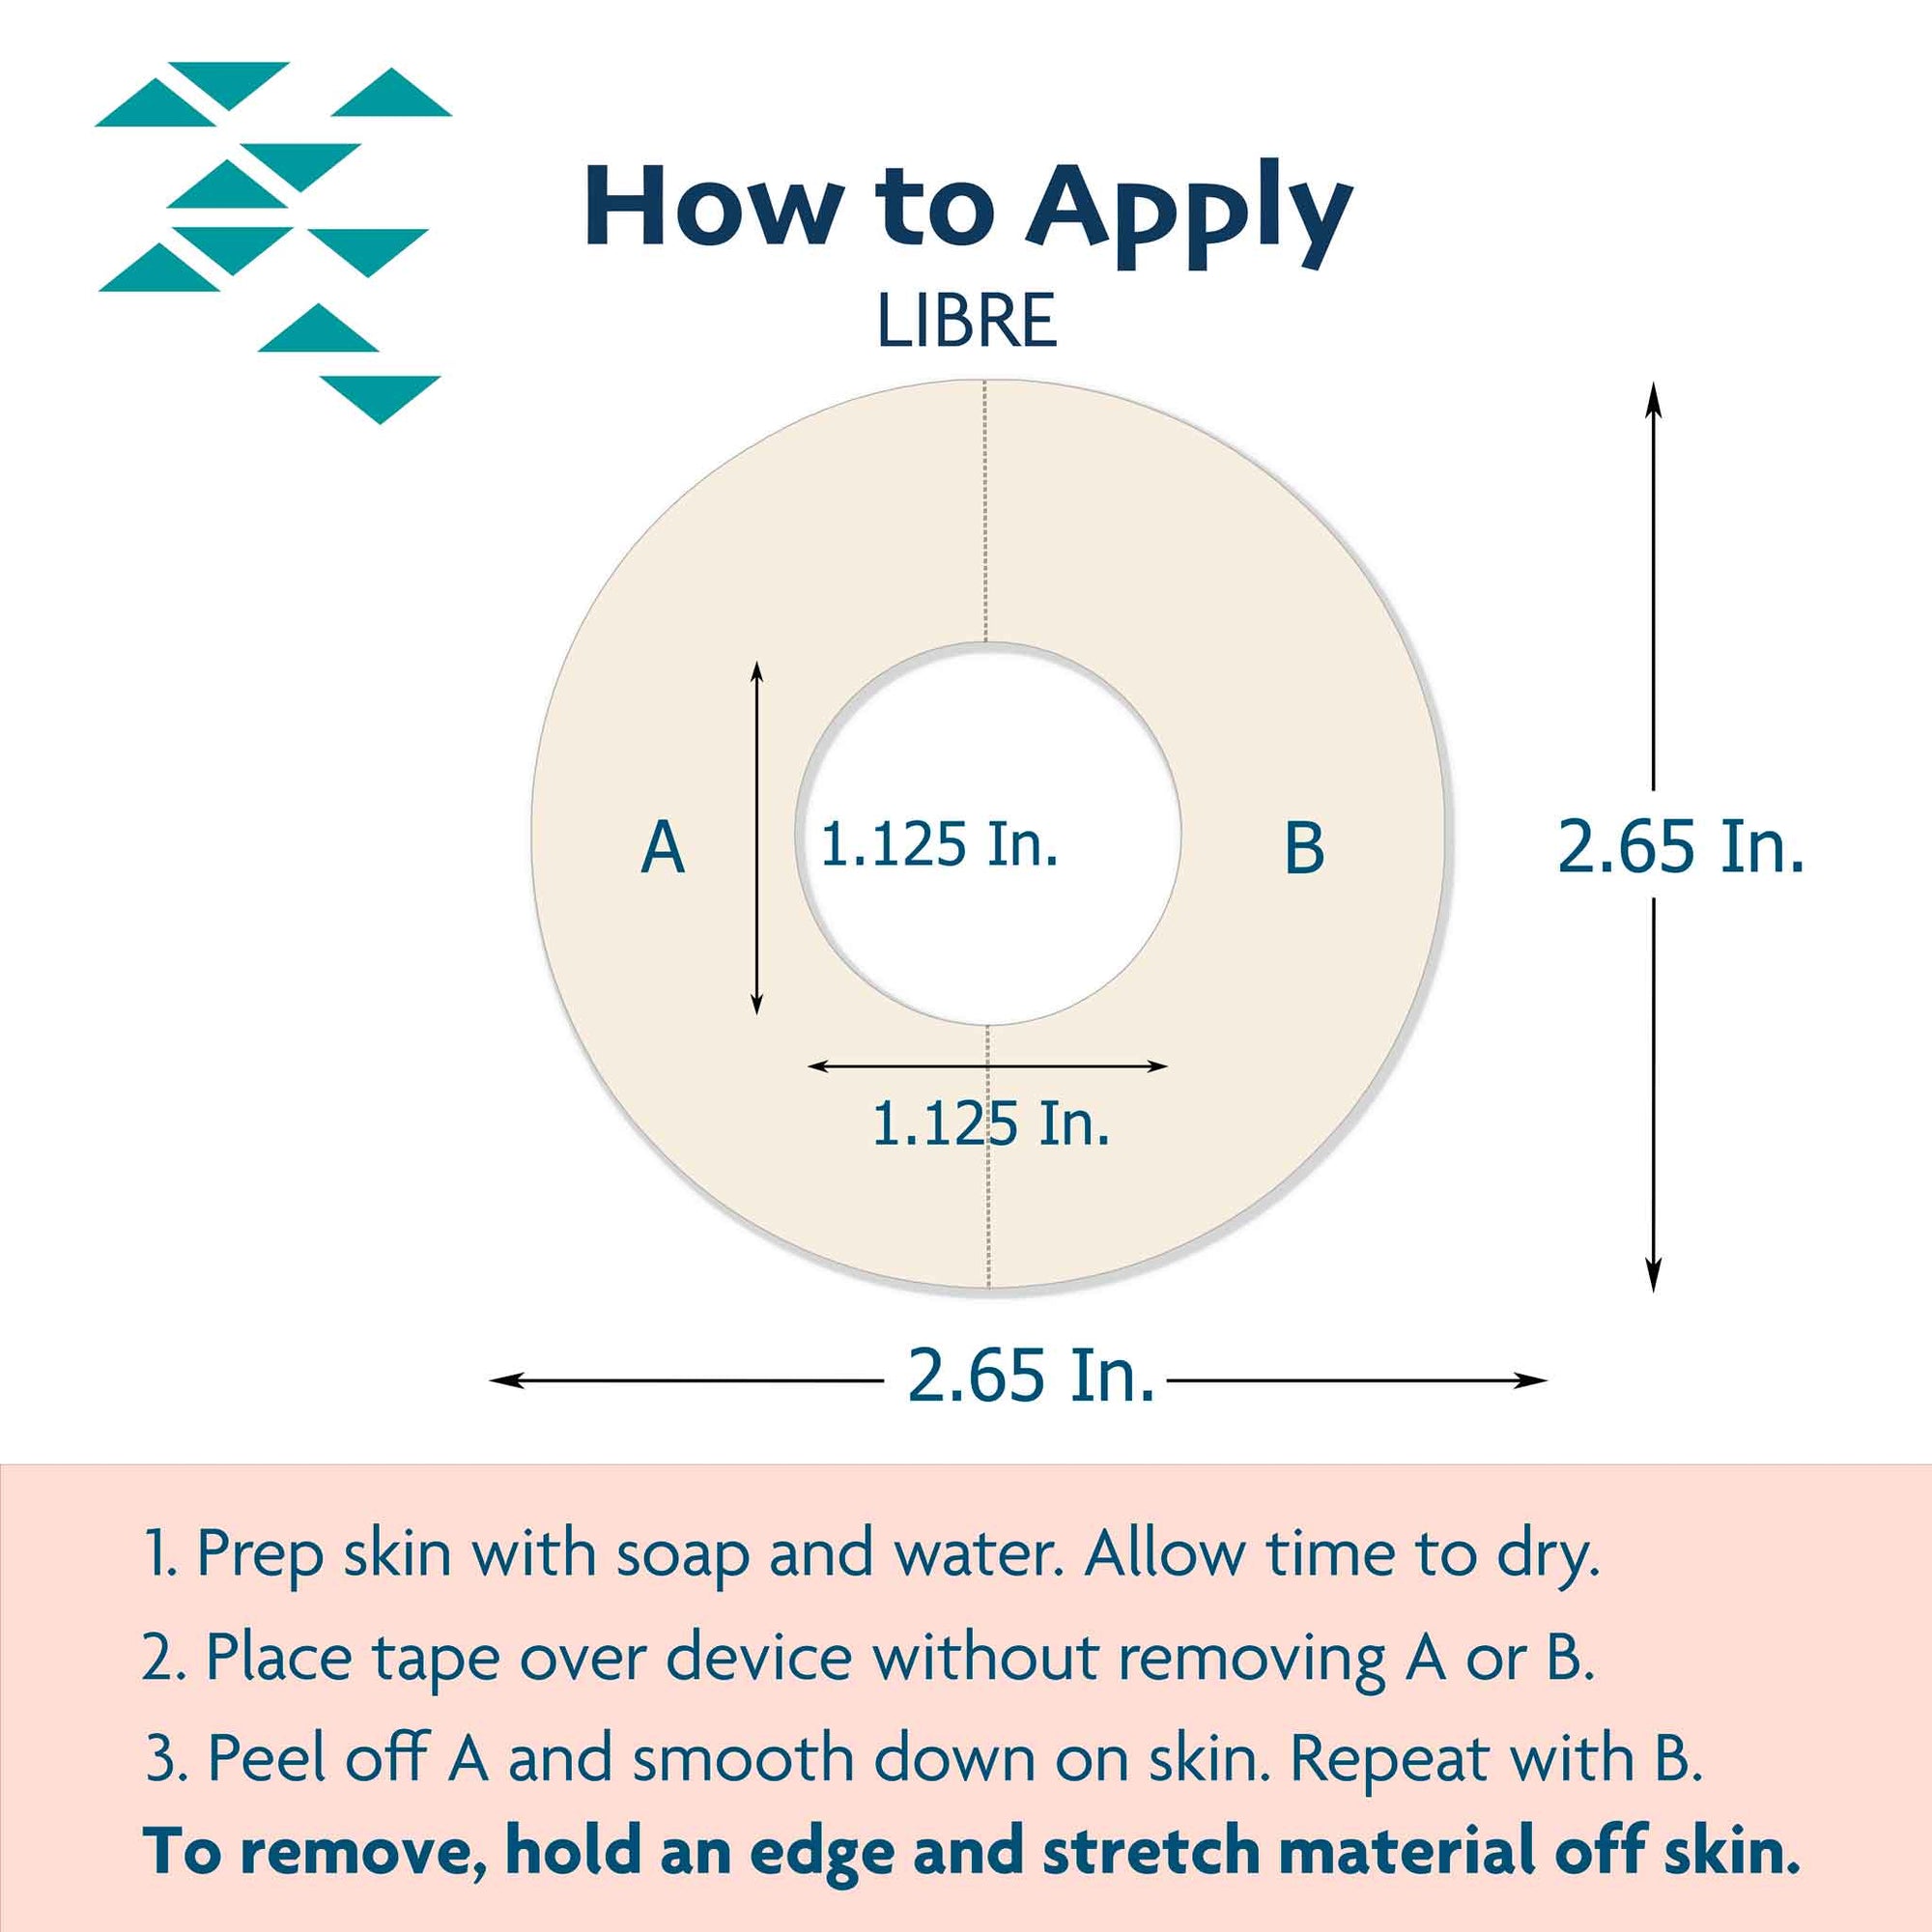 Libre CGM adhesive over freestyle device application instructions, Abbott Lingo